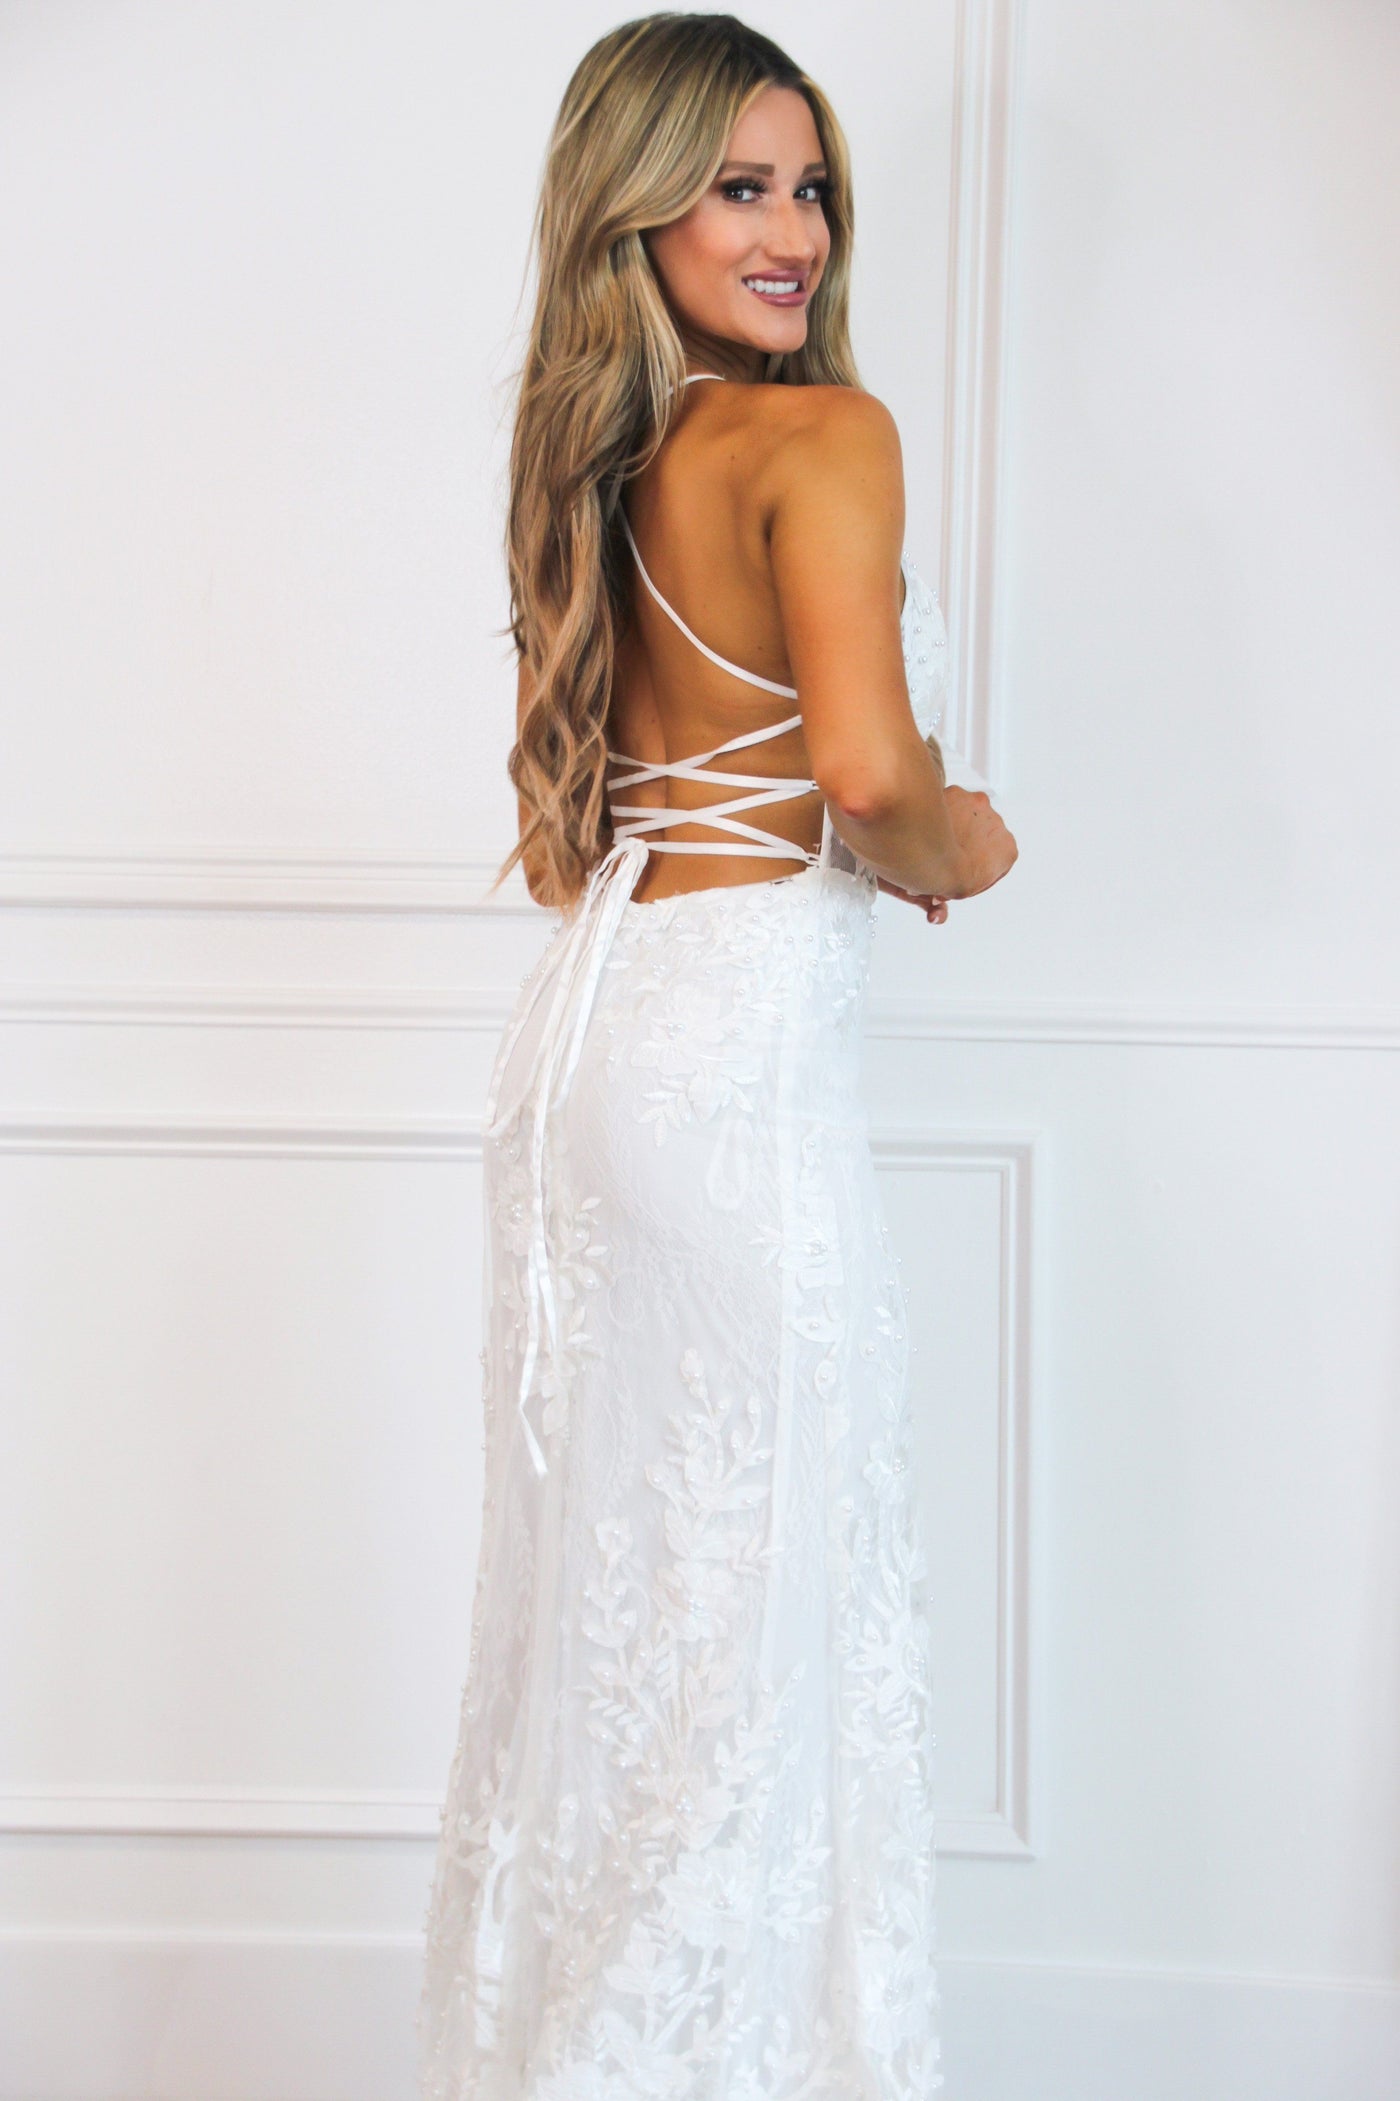 Must Be Dreaming Detachable Skirt Lace Applique Wedding Dress: White - Bella and Bloom Boutique